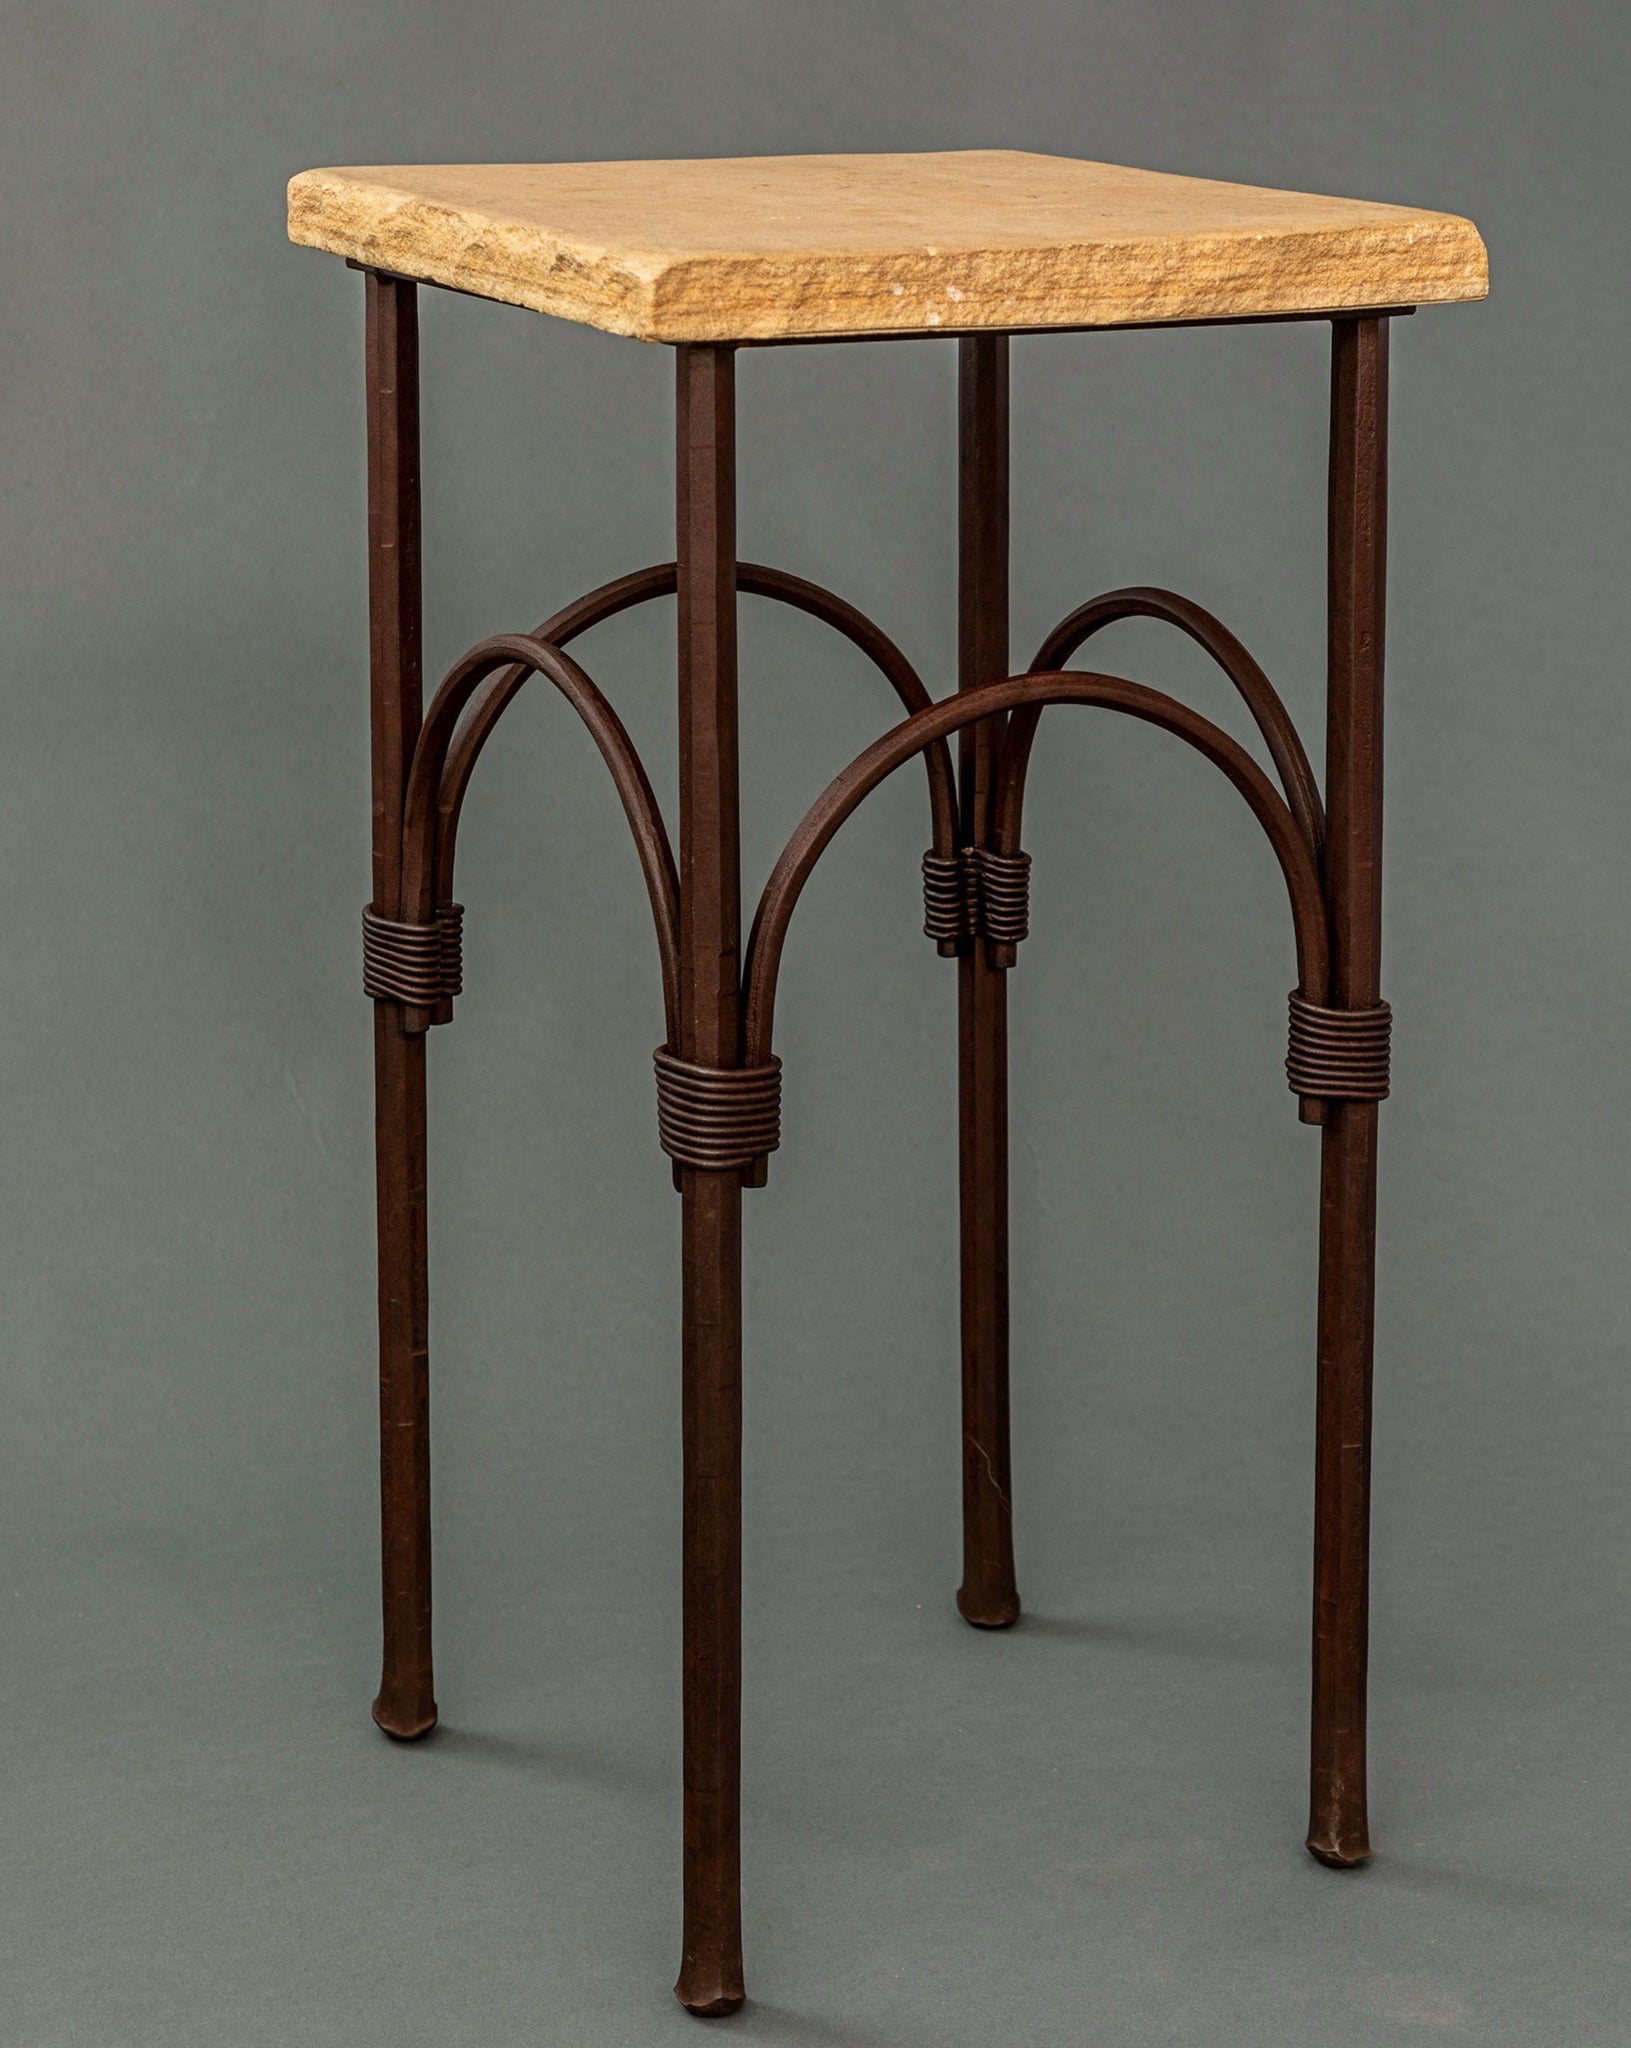 A naturally rust finished forged steel pedestal table with a flagstone top.